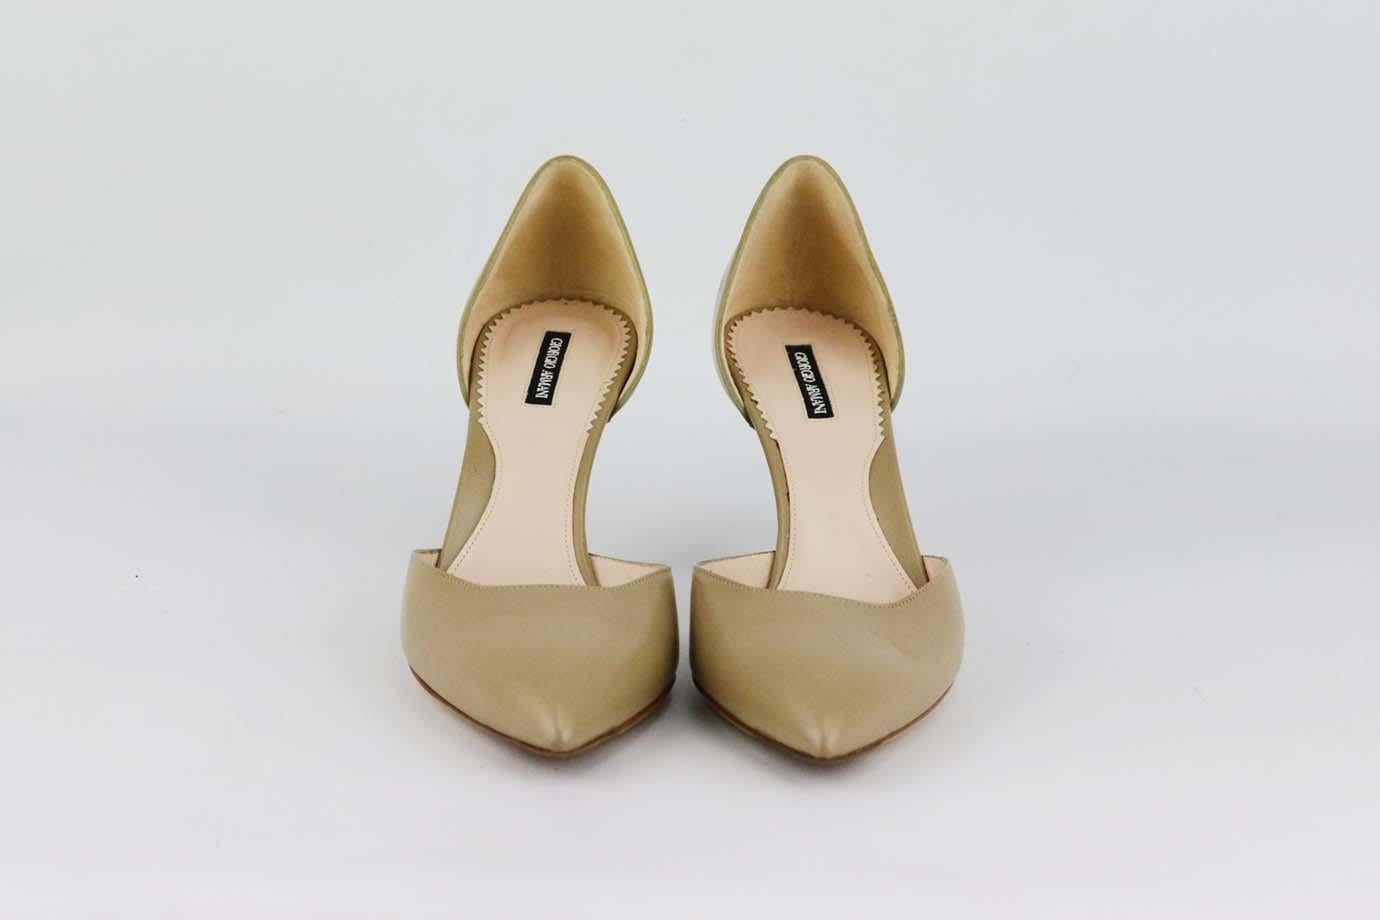 These d’orsay pumps by Giorgio Armani are a classic style that will never date, made in Italy from beige leather, they have sharp pointed toes and comfortable 50mm heels to take you from morning meetings to dinner with friends. Heel measures